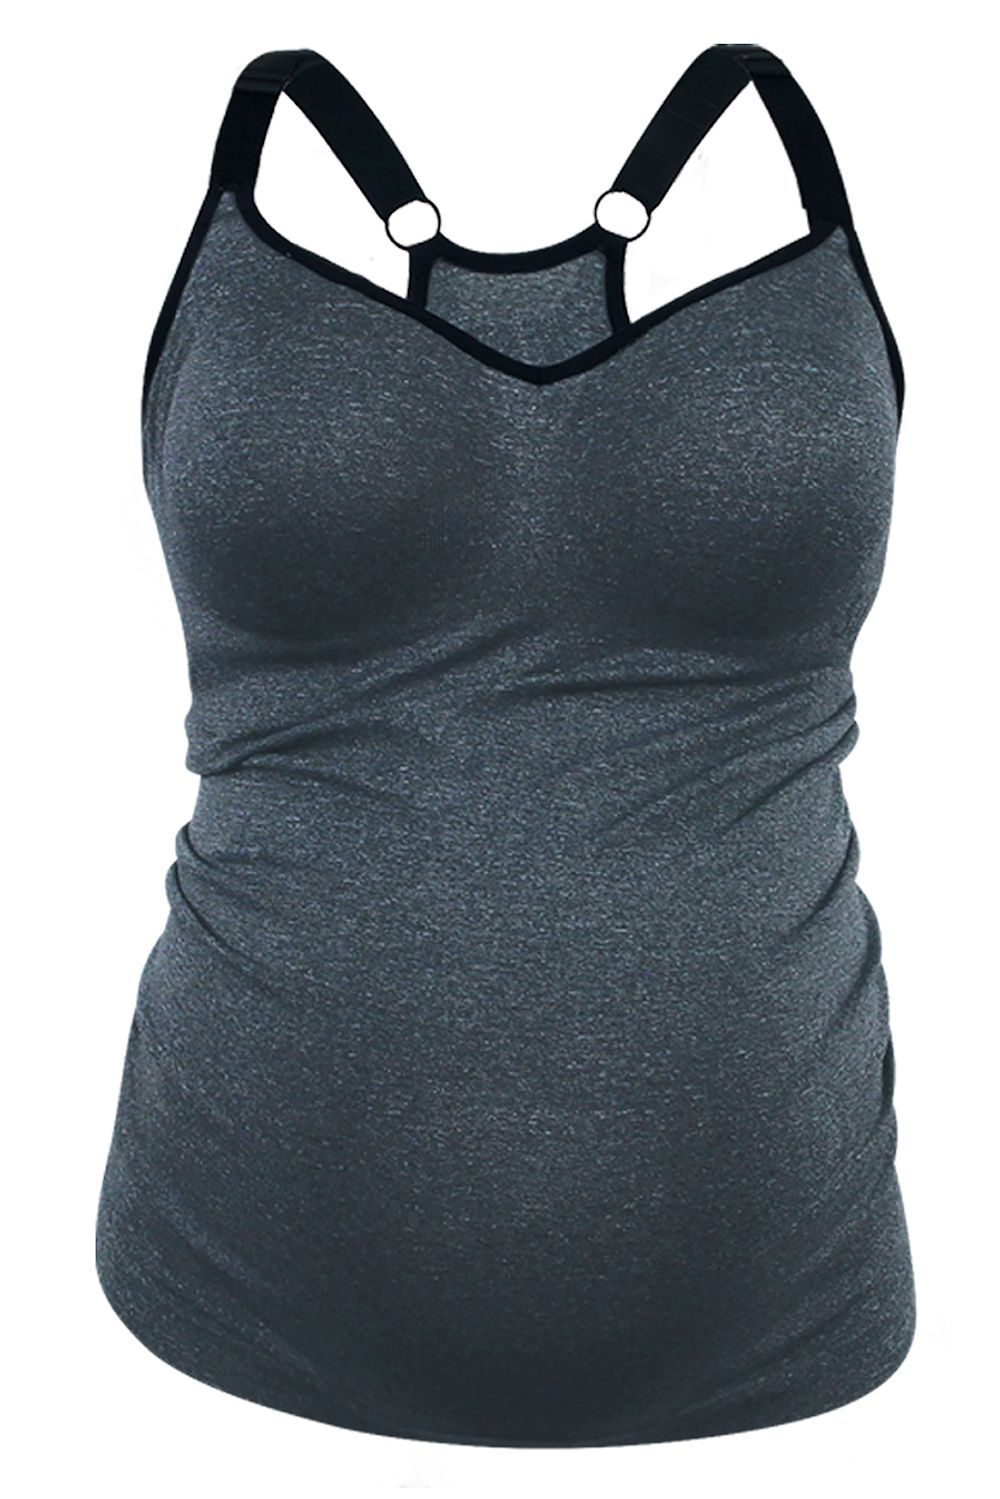 Cake Maternity Sugar Candy Everyday Tank Top Charcoal